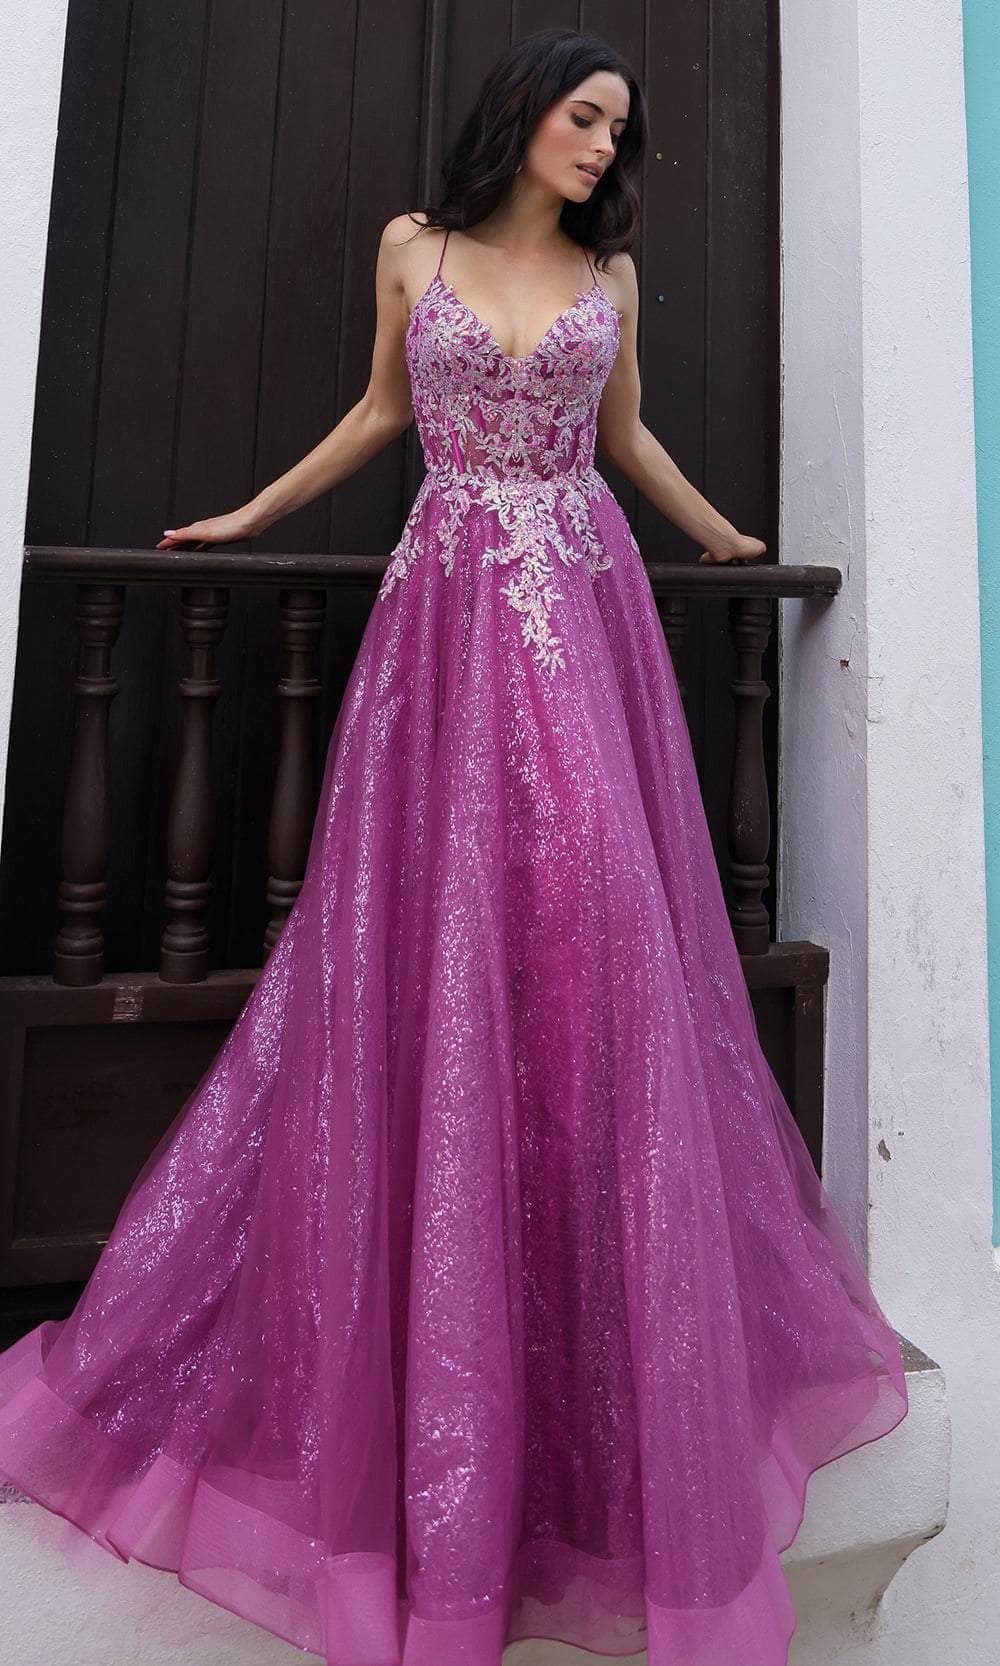 Image of Nox Anabel C1407 - Lace Applique Sleeveless Prom Gown